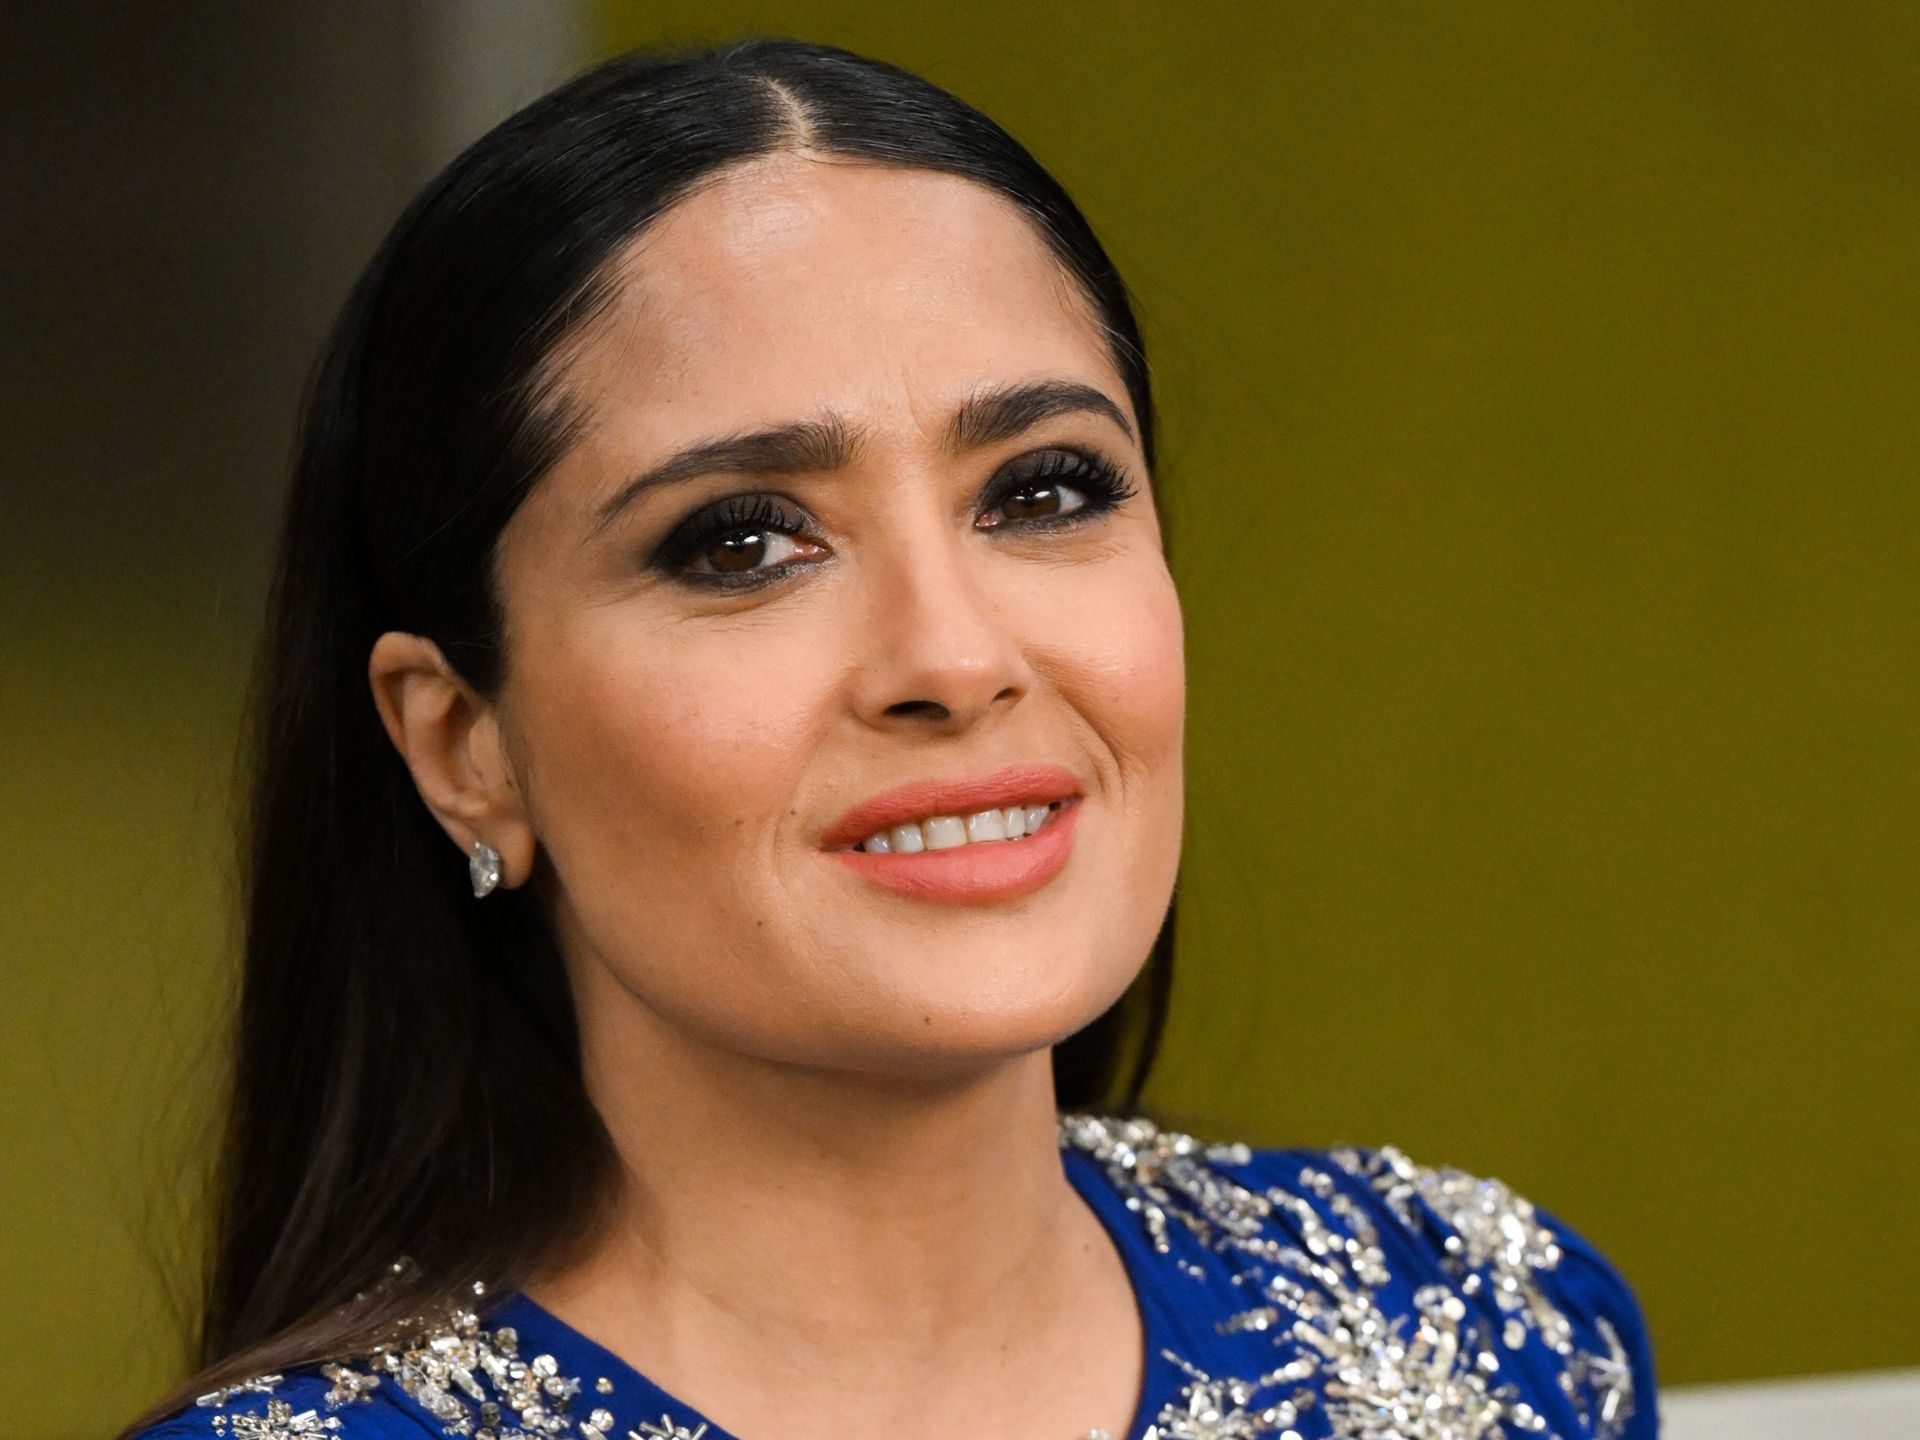 Salma Hayek's relationship with billionaire mother-in-law revealed: inside  their lavish family life